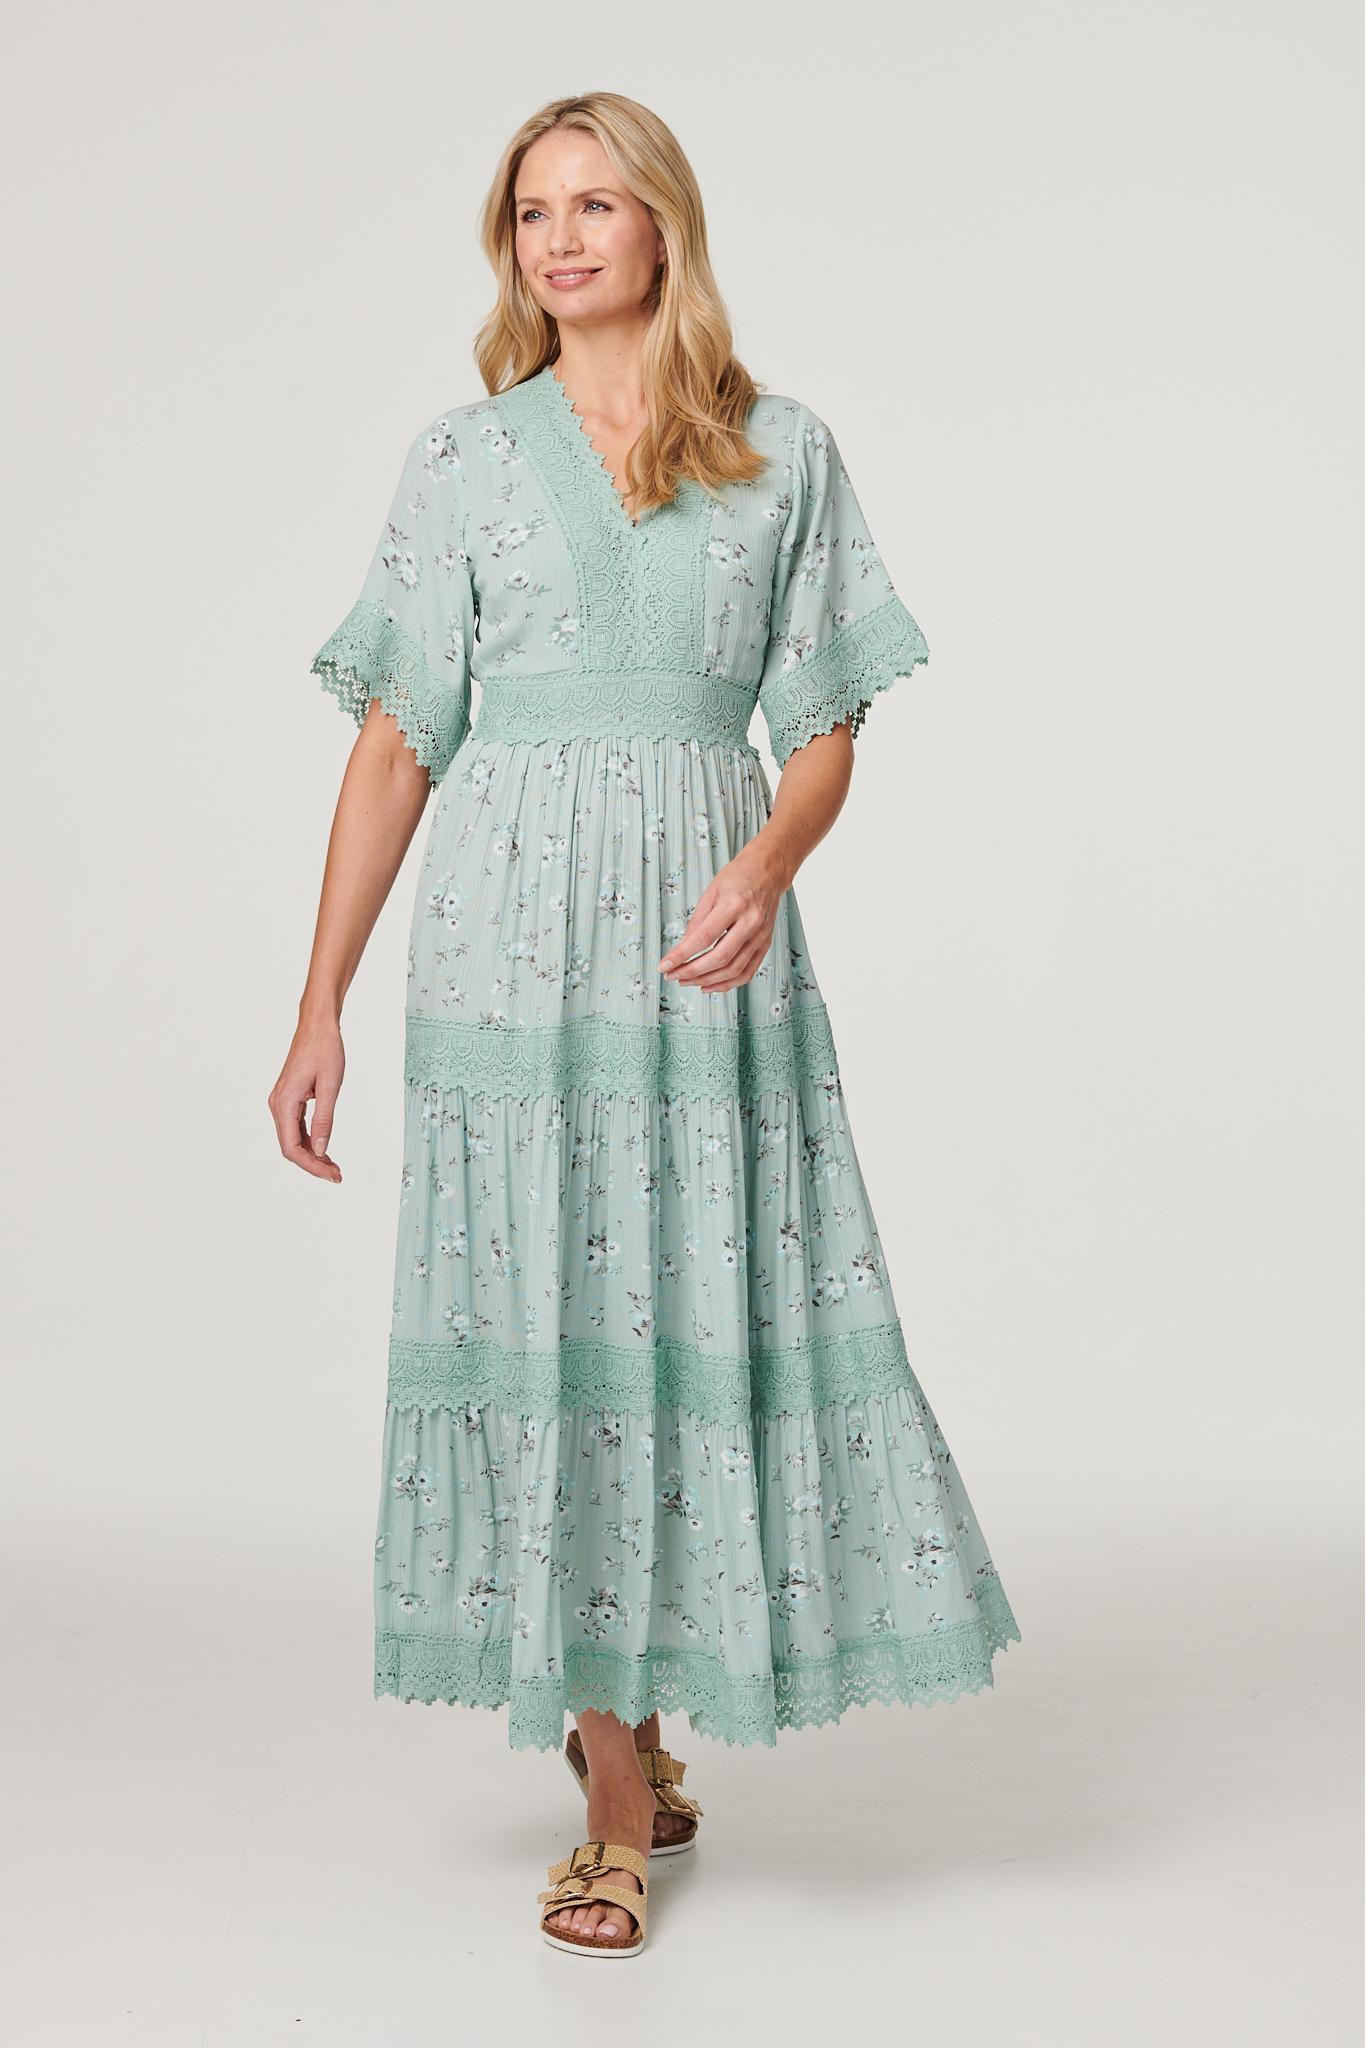 Light Green | Floral Lace Tiered Maxi Dress : Model is 5'10"/178 cm and wears UK10/EU38/US6/AUS10